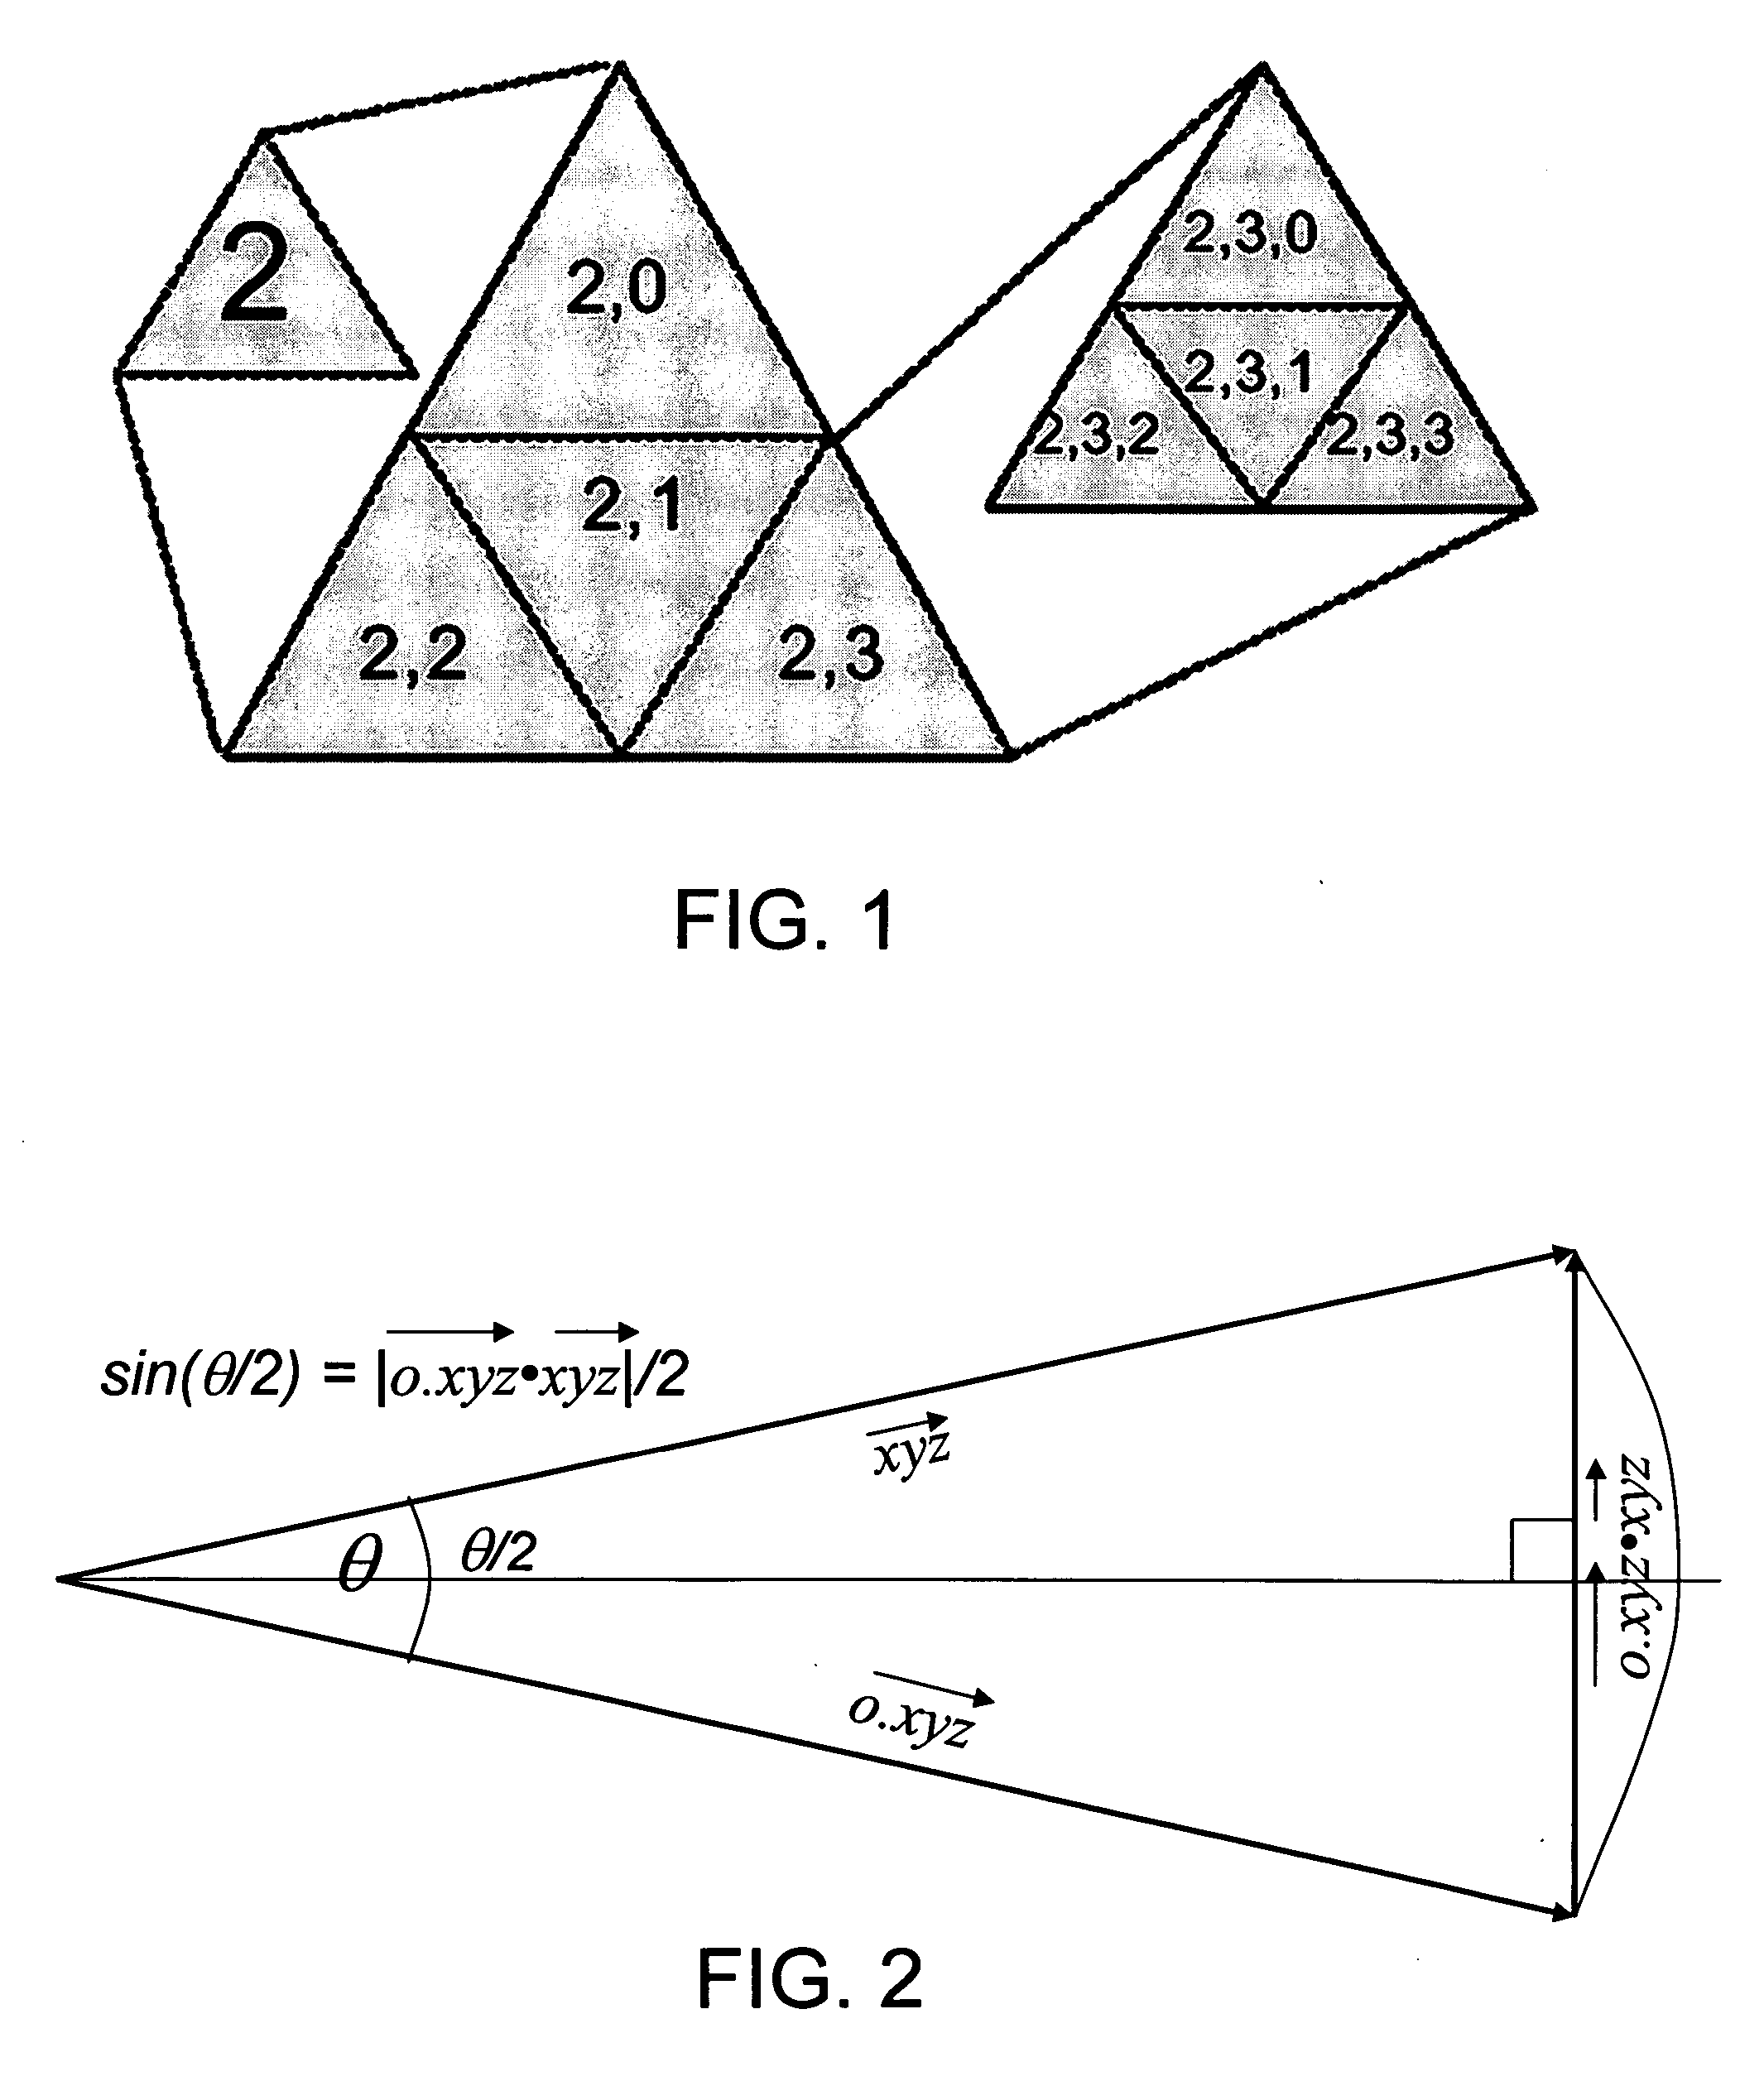 System and process for identifying objects and/or points nearby a given object or point